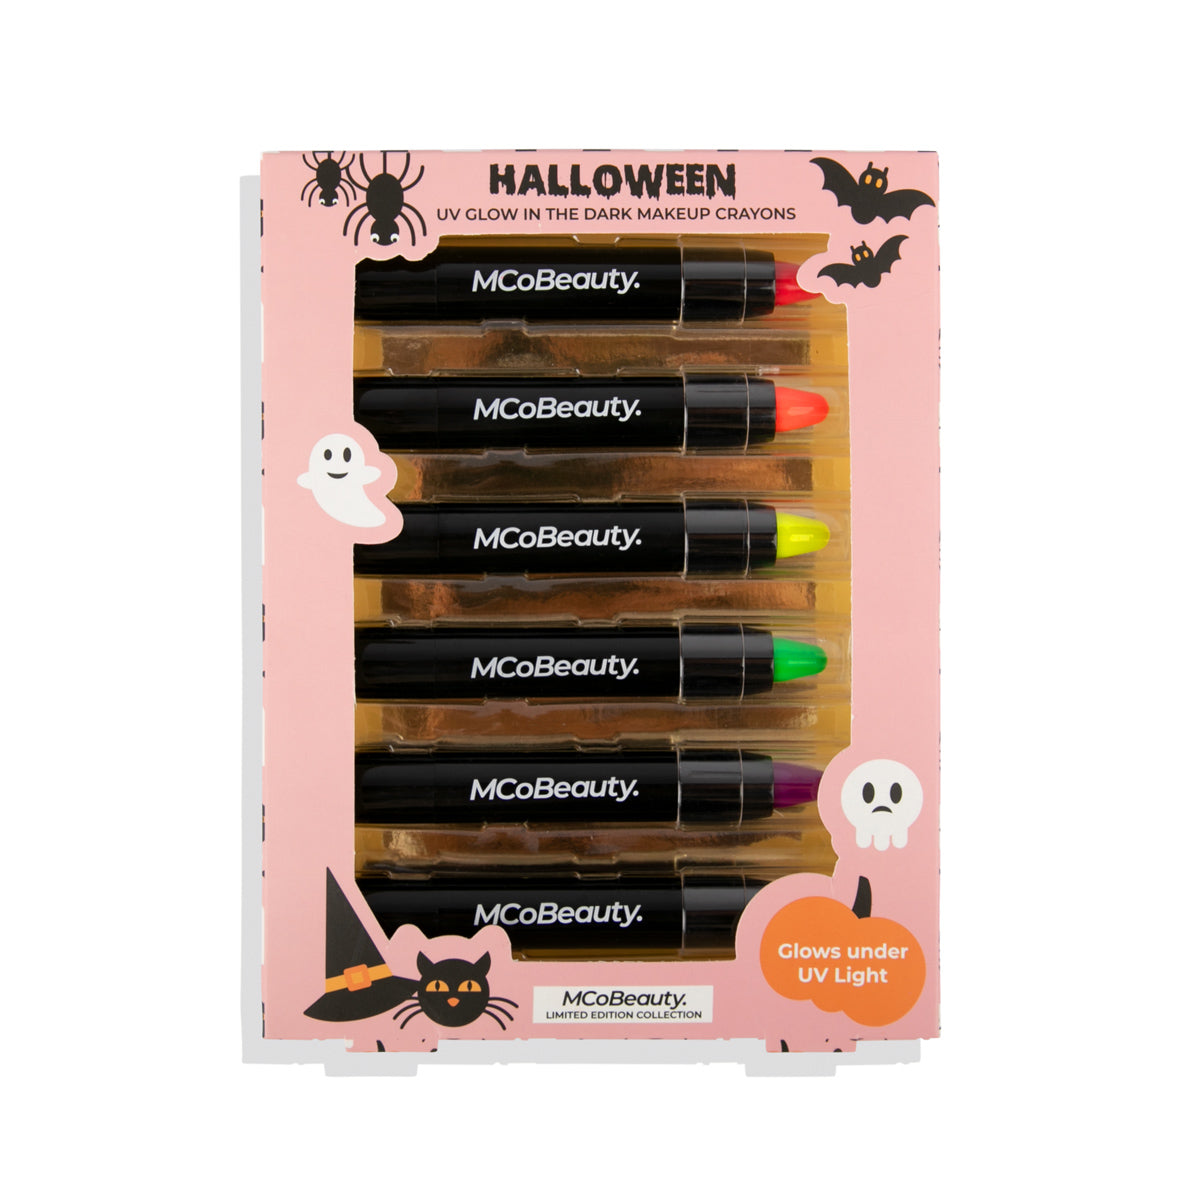 I W UV GLOW IN THE DARK MAKEUP CRAYONS MCoBeauty. MCoBeauty. MCoBeauty. MCoBeauty. MCoBeauty. MCoBeauty. MCoBeauty. ED EDITION COLLECTION - 